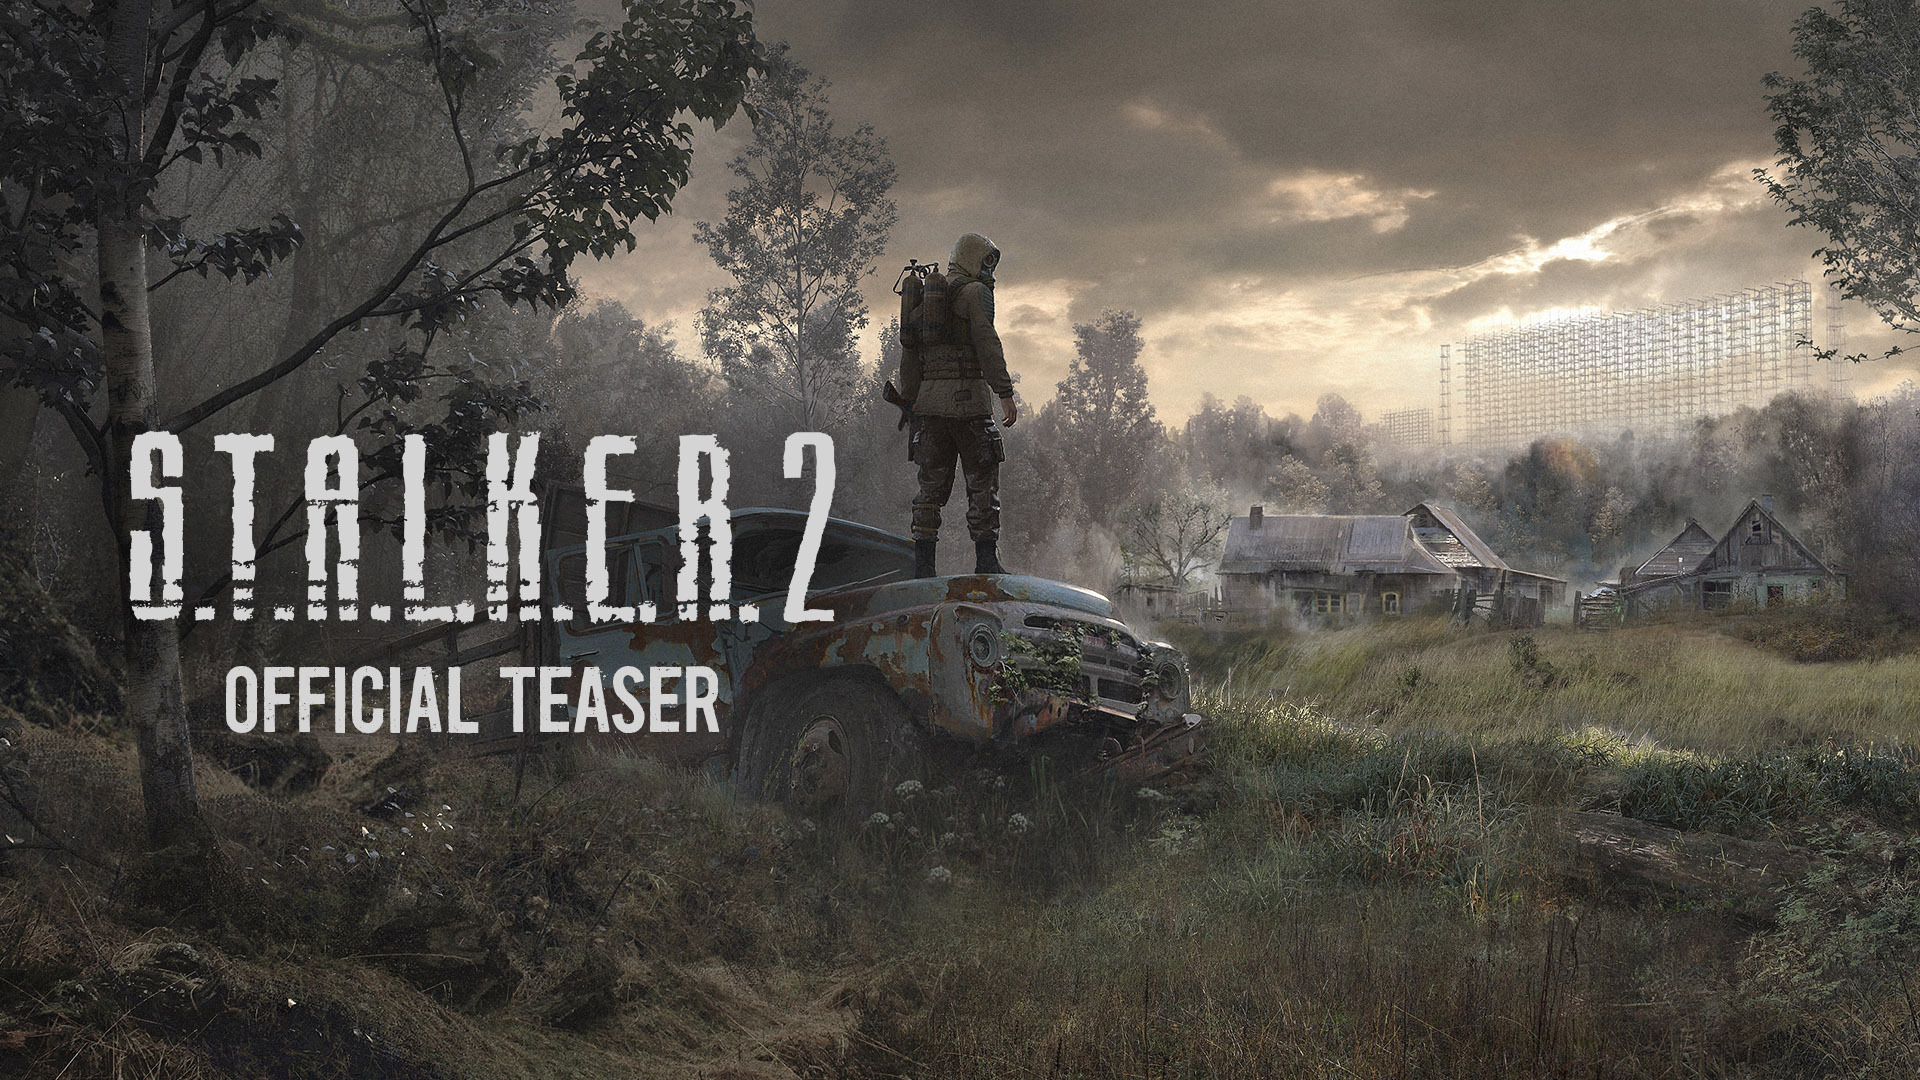 Video For S.T.A.L.K.E.R. 2 Development Update: a Gameplay Teaser and a New Hero